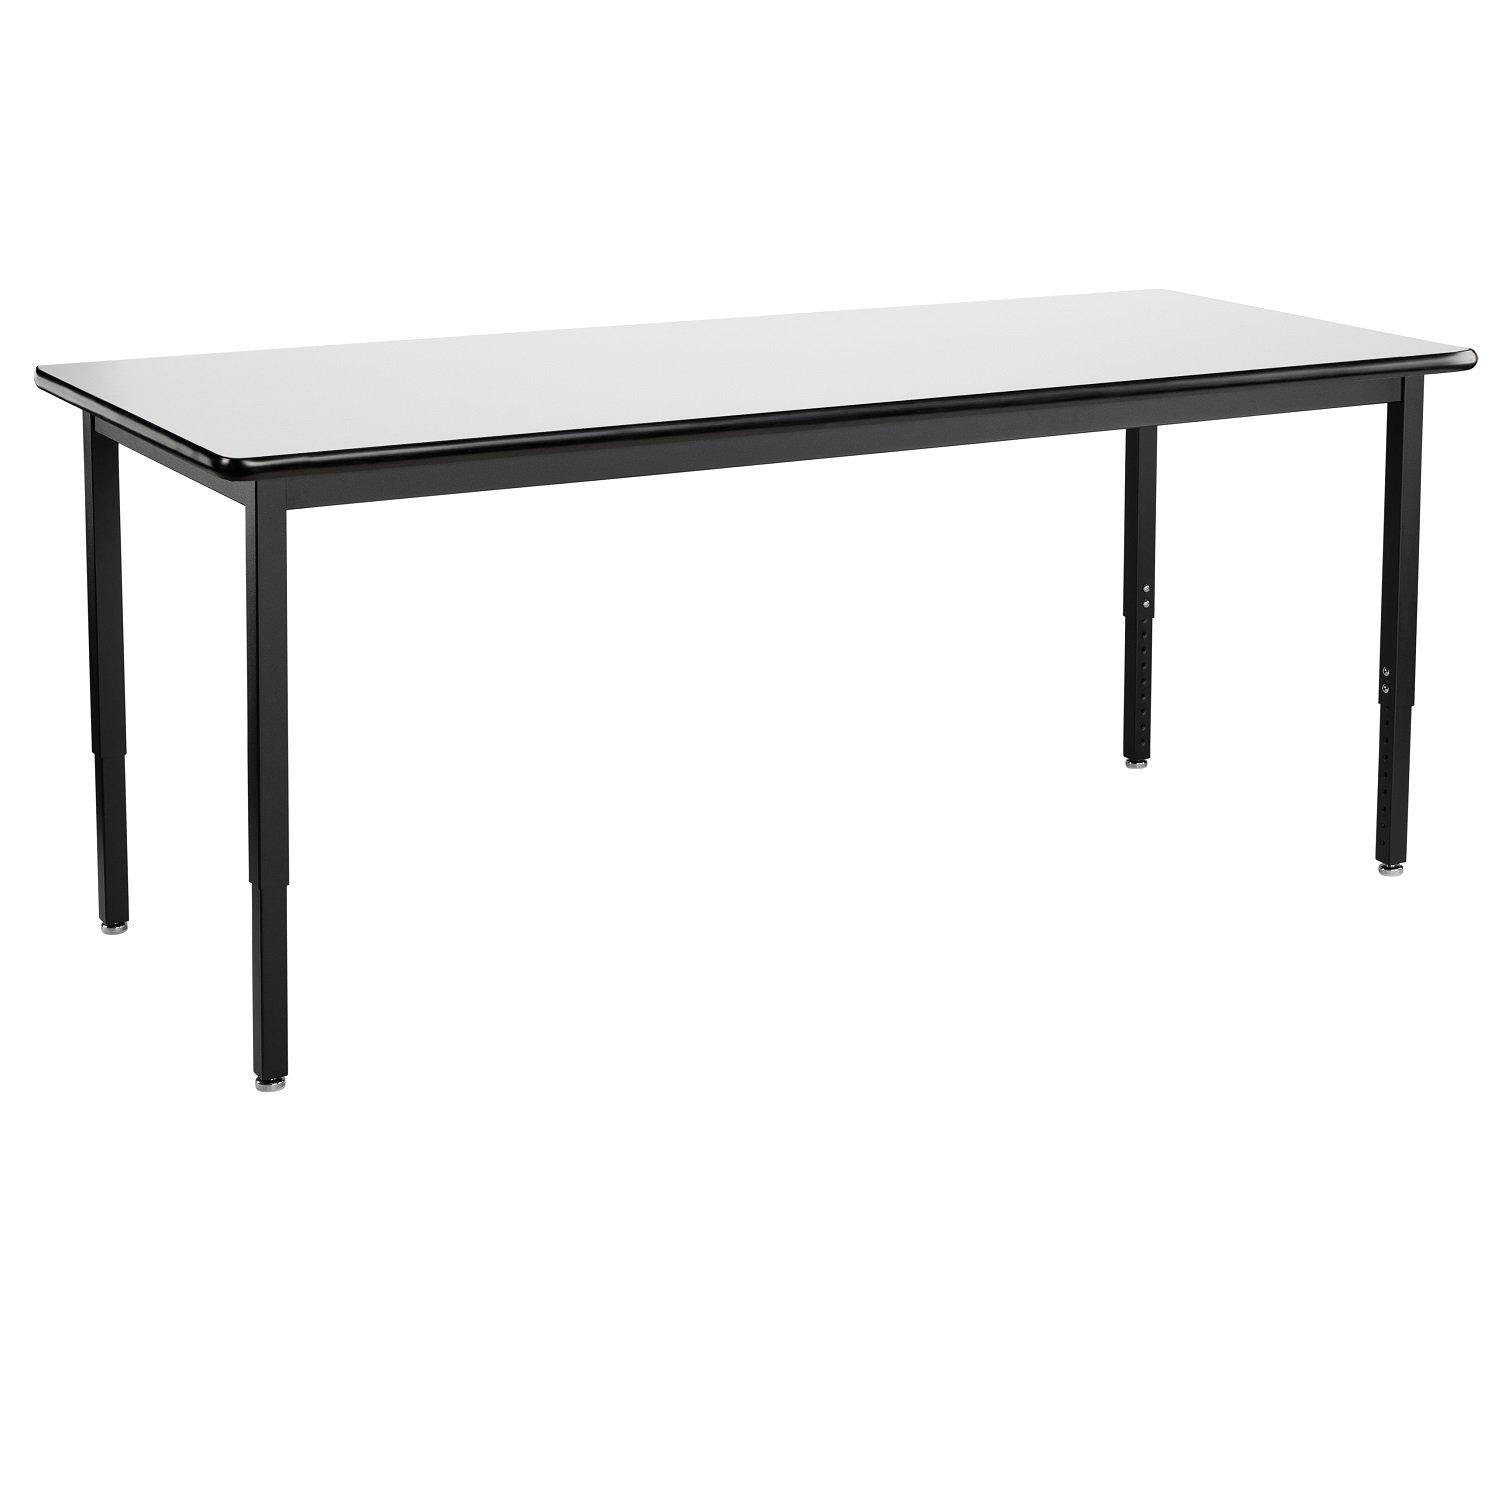 Heavy-Duty Height-Adjustable Utility Table, Black Frame, 30" x 96", Whiteboard High-Pressure Laminate Top